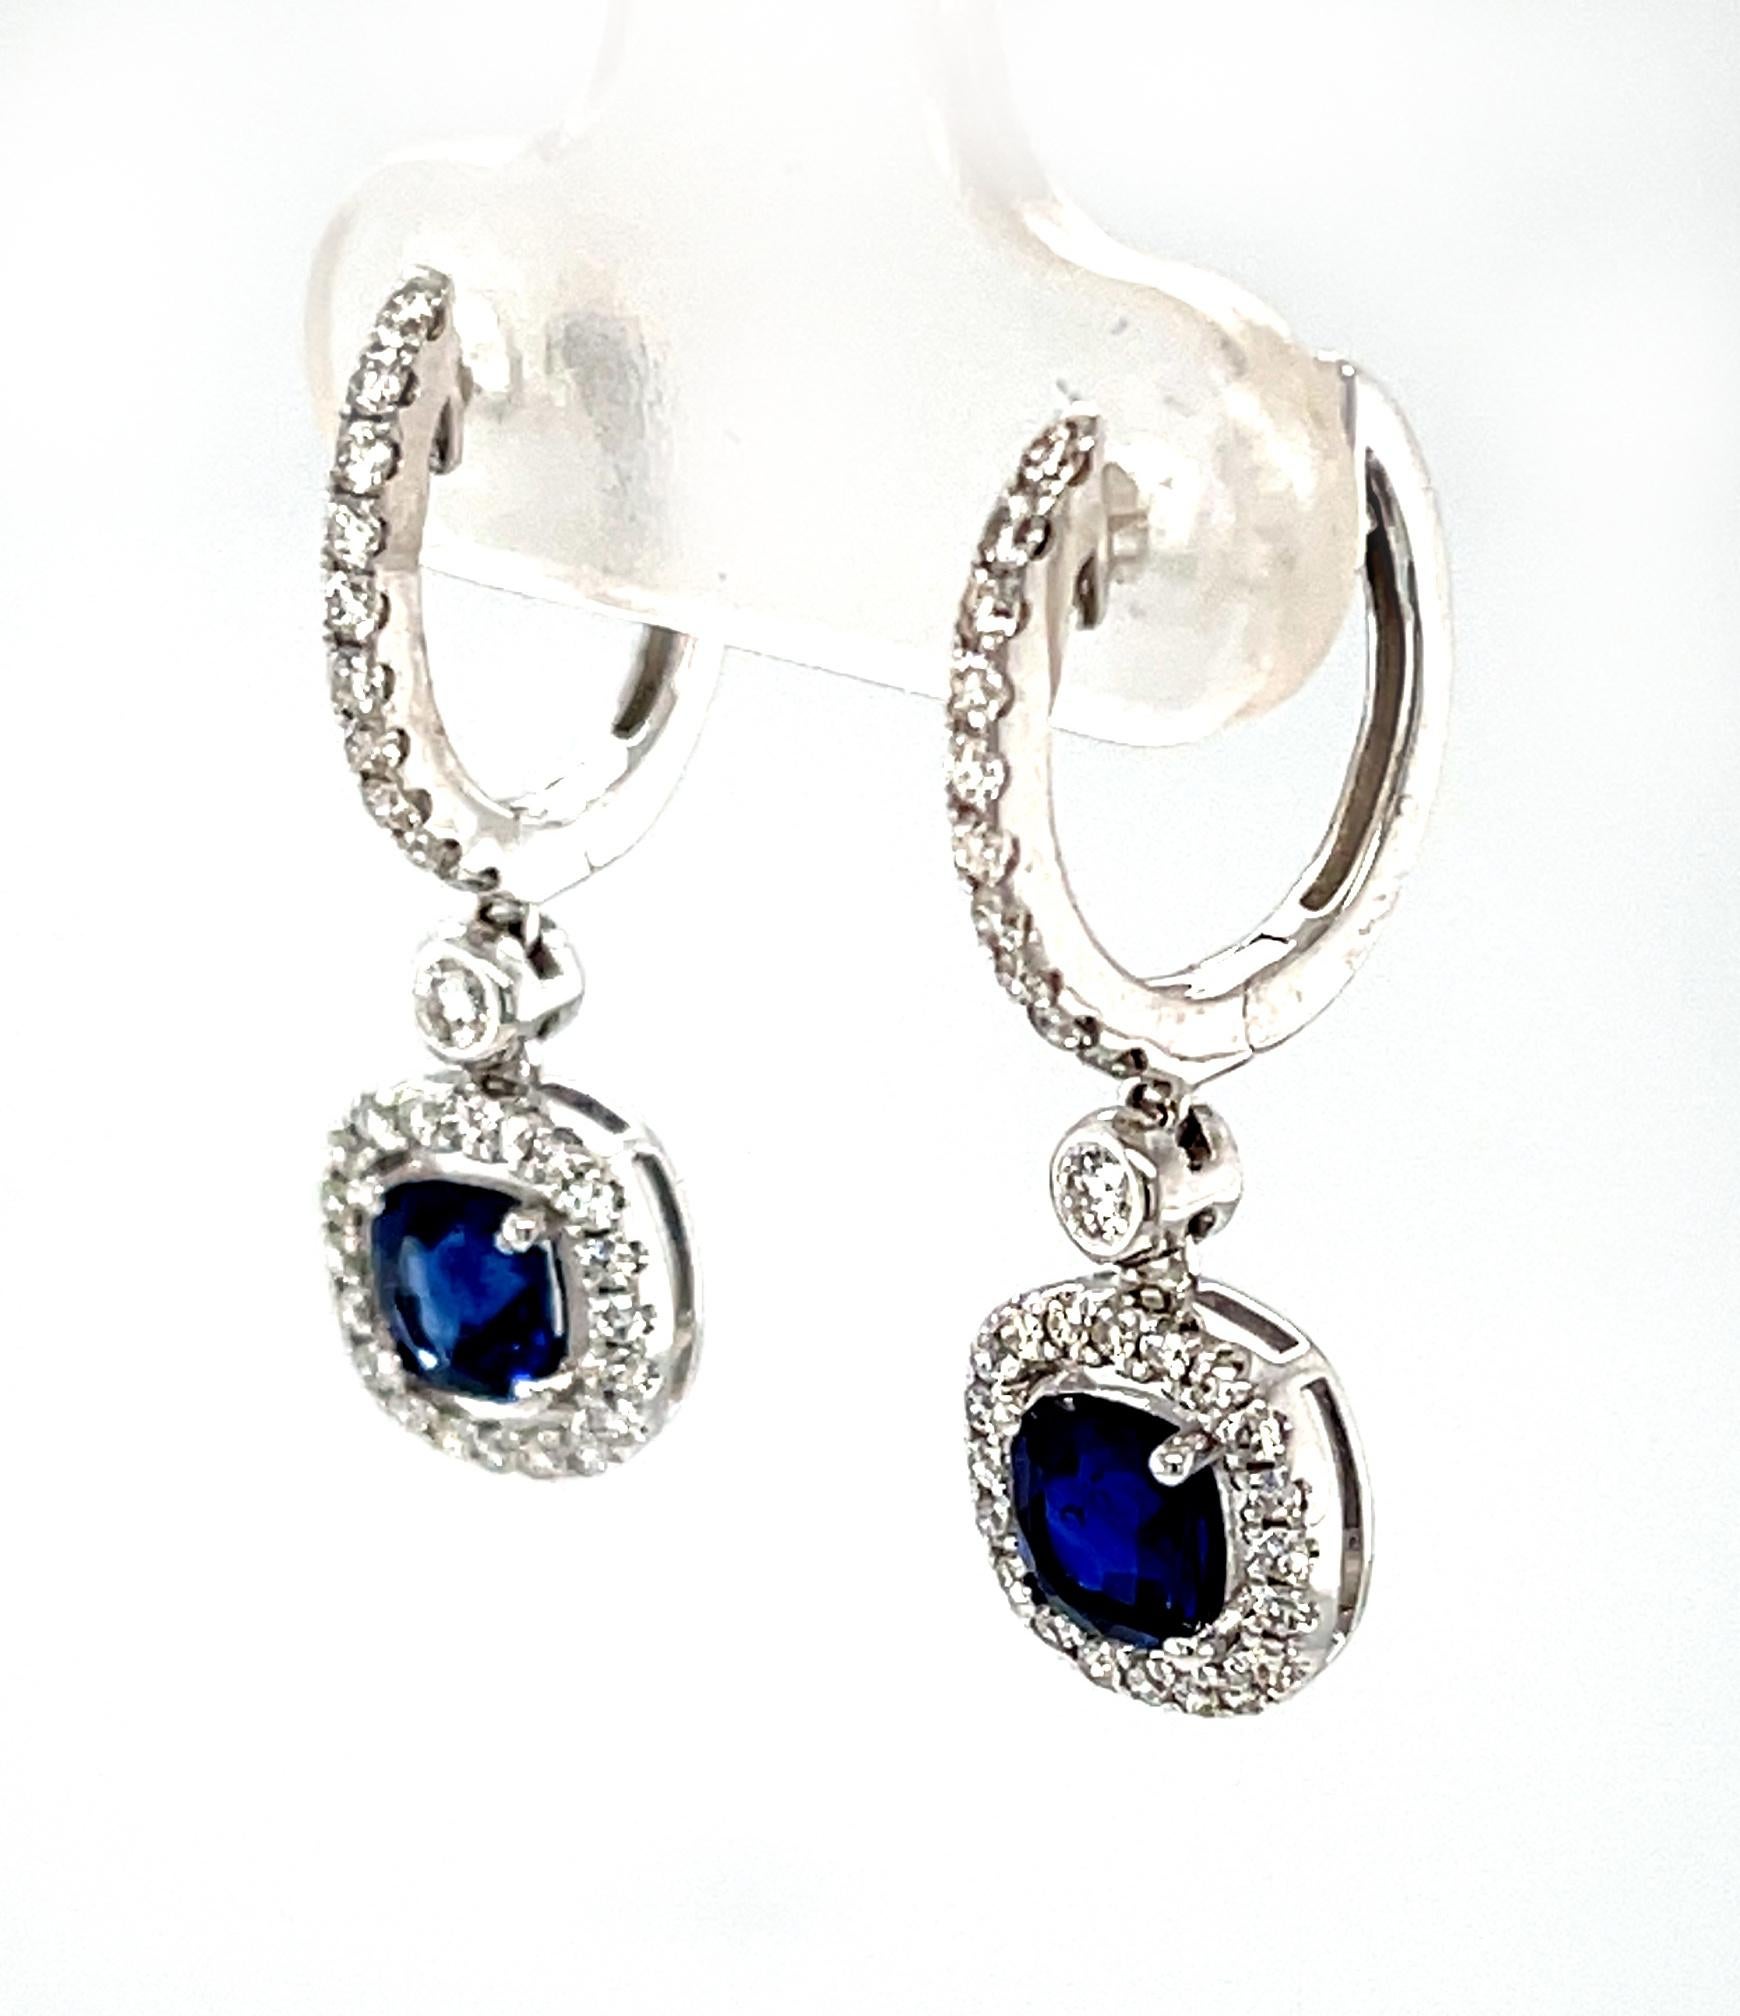 These elegant sapphire and diamond earrings feature a matched pair of beautiful, gem blue sapphires! 18k white gold floating halos create a lovely frame around the rich, royal blue cushions and are set with brilliant, sparkling diamonds. Each drop